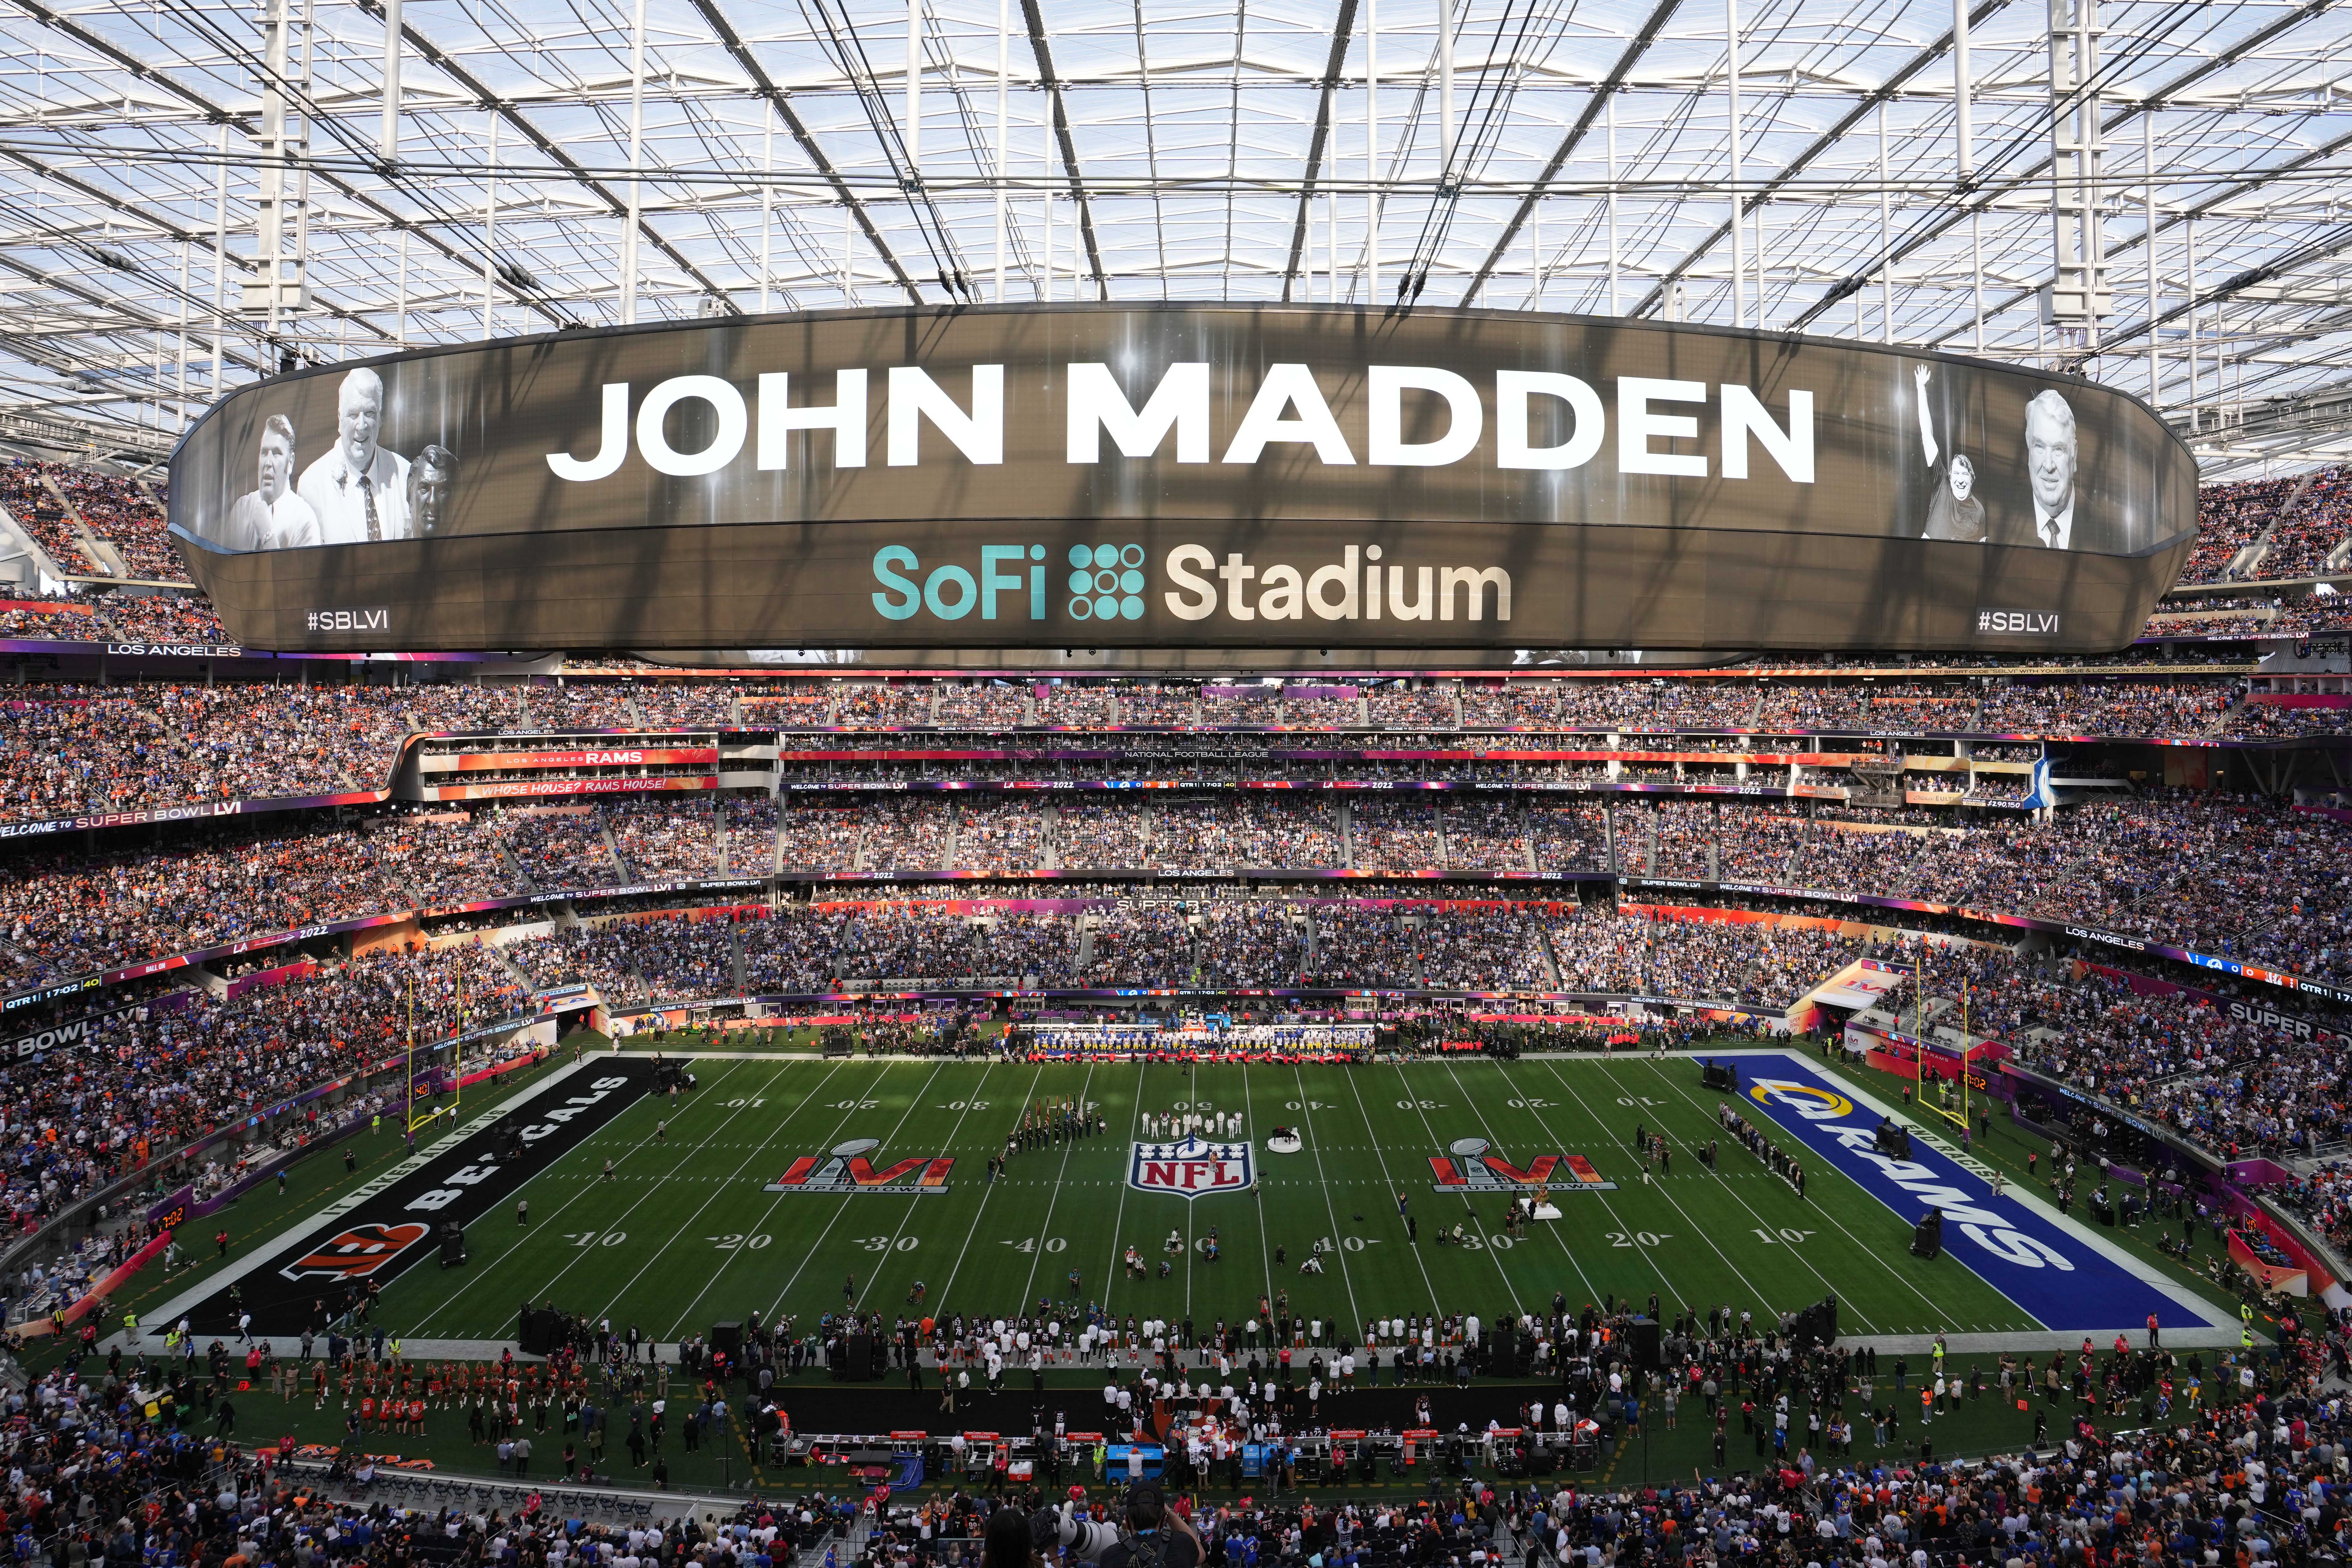 A tribute to former NFL player and coach John Madden